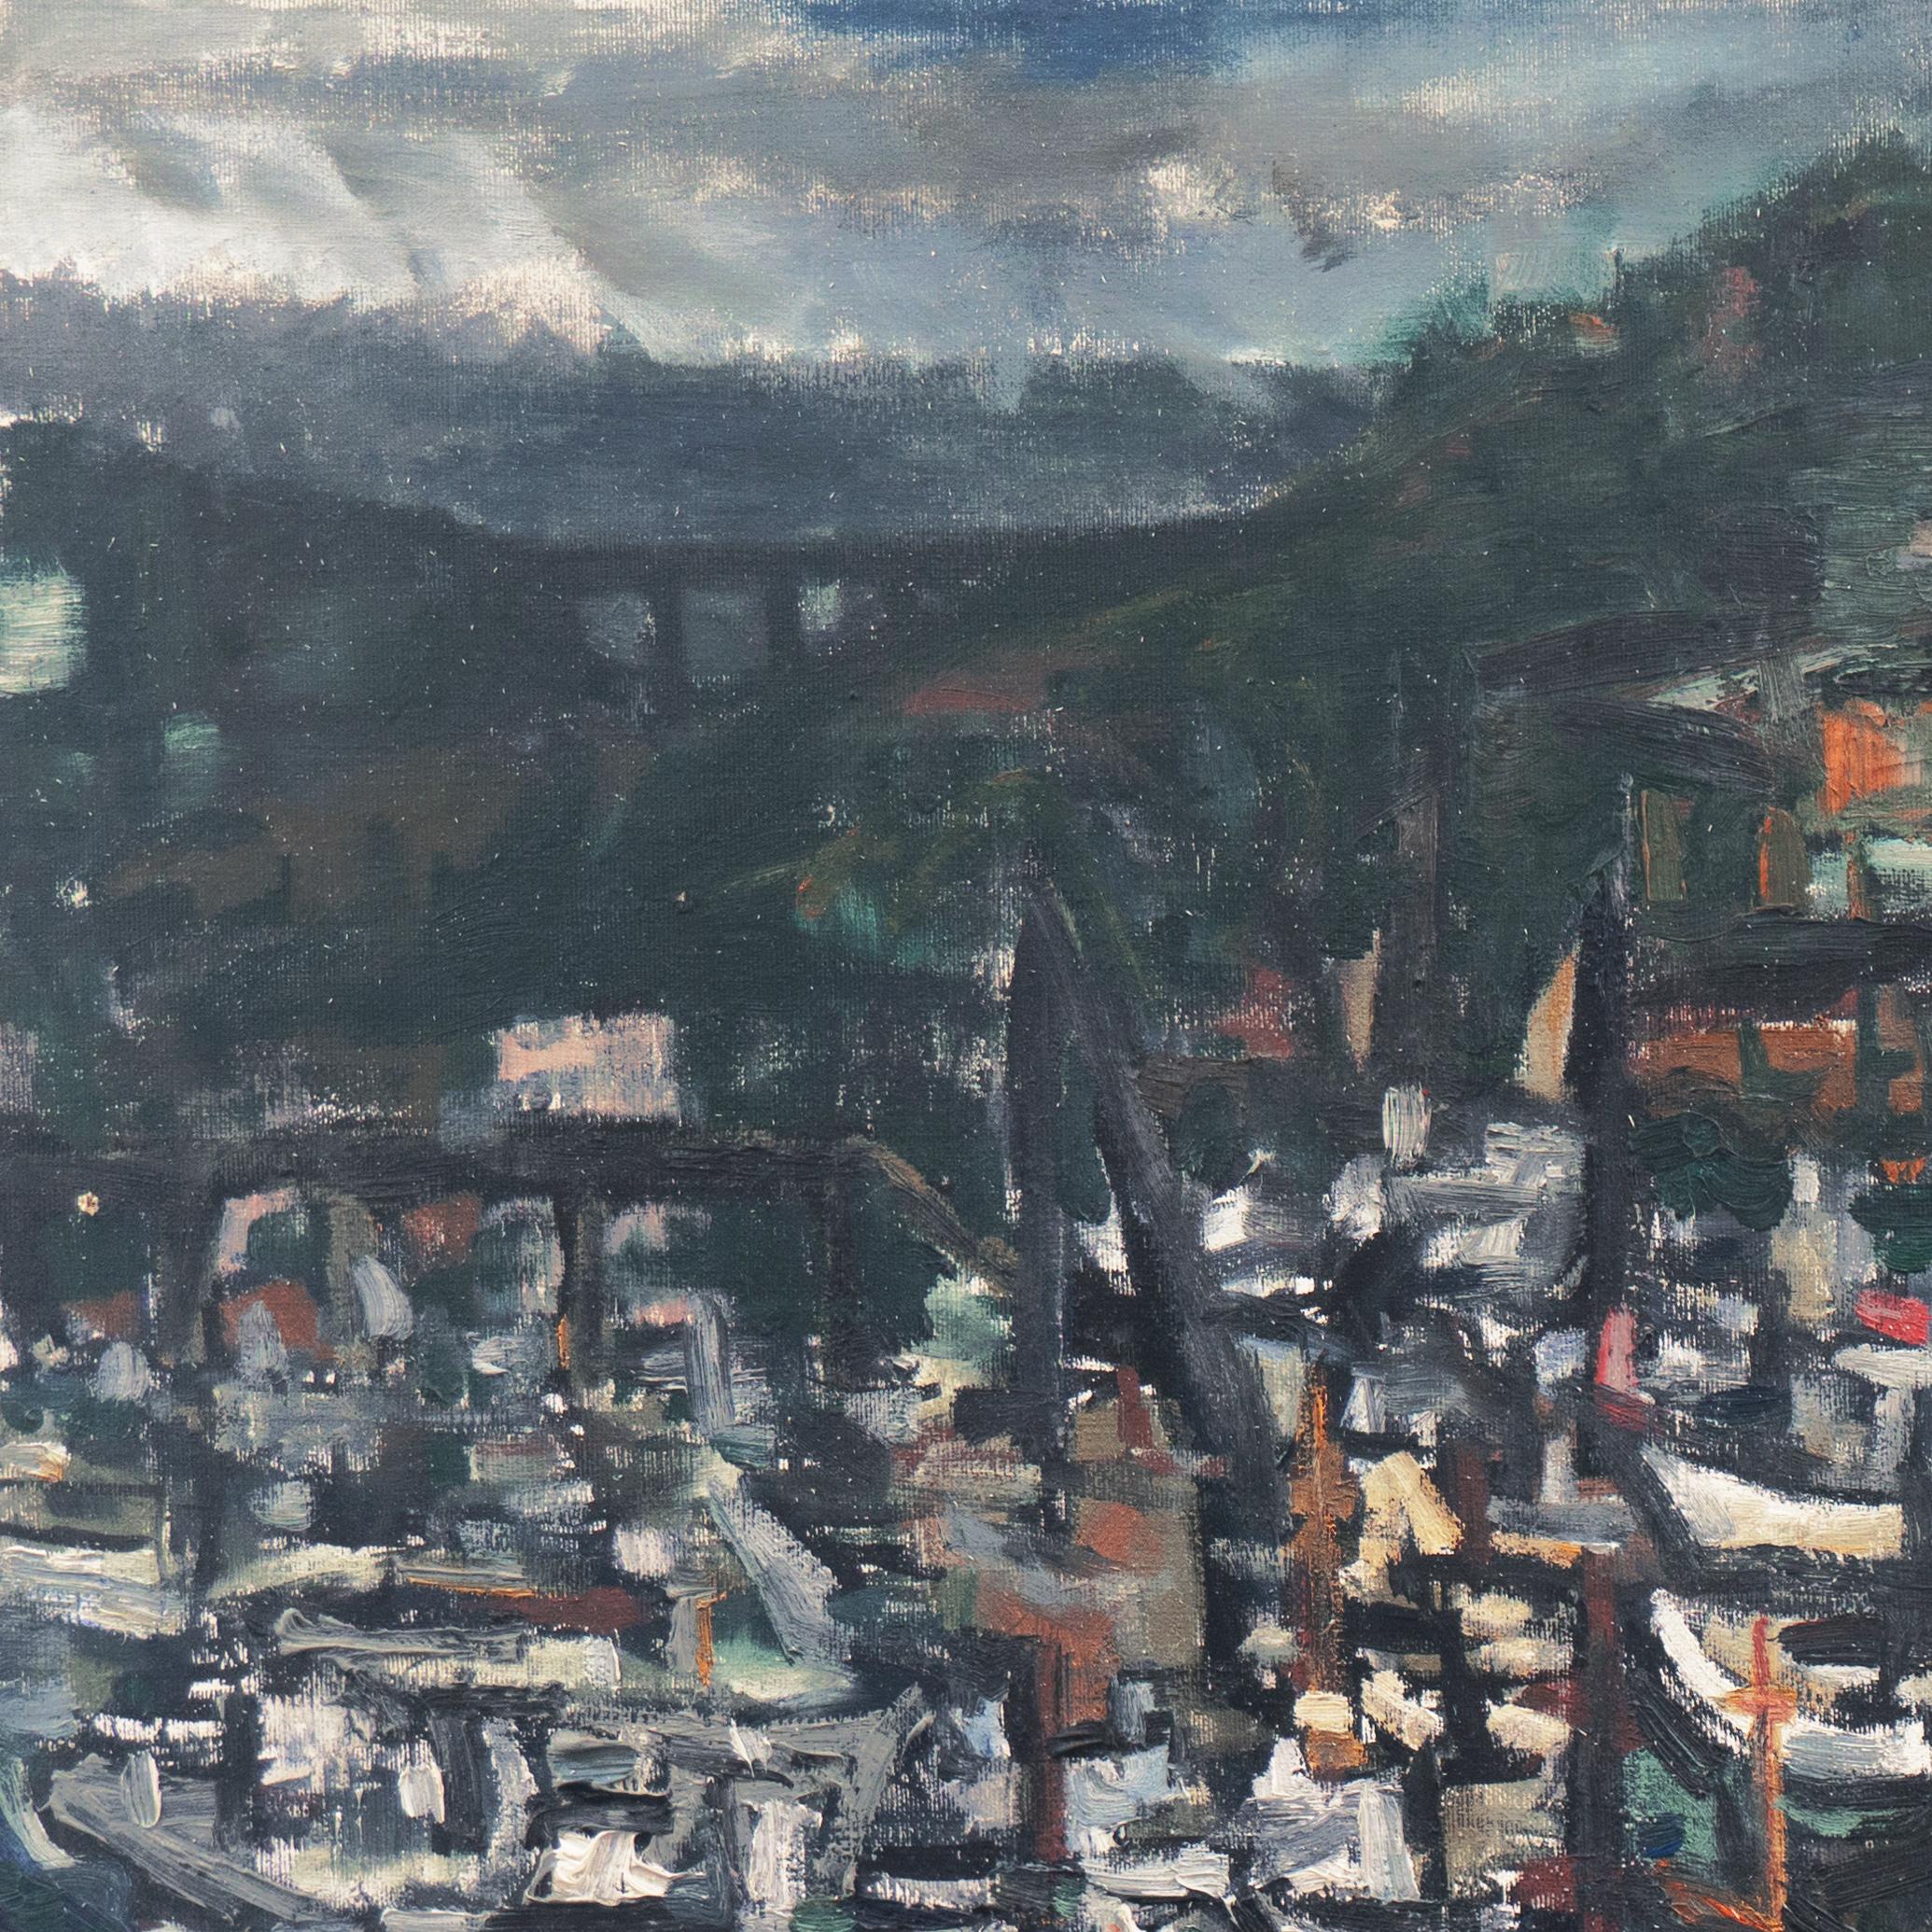 Initialed lower right, 'A.F' (American, 20th century) and painted circa 1960.

A substantial, mid-century American School oil showing a view of a busy harbor with numerous boats moored against wooden docks and a view beyond towards gently rolling,